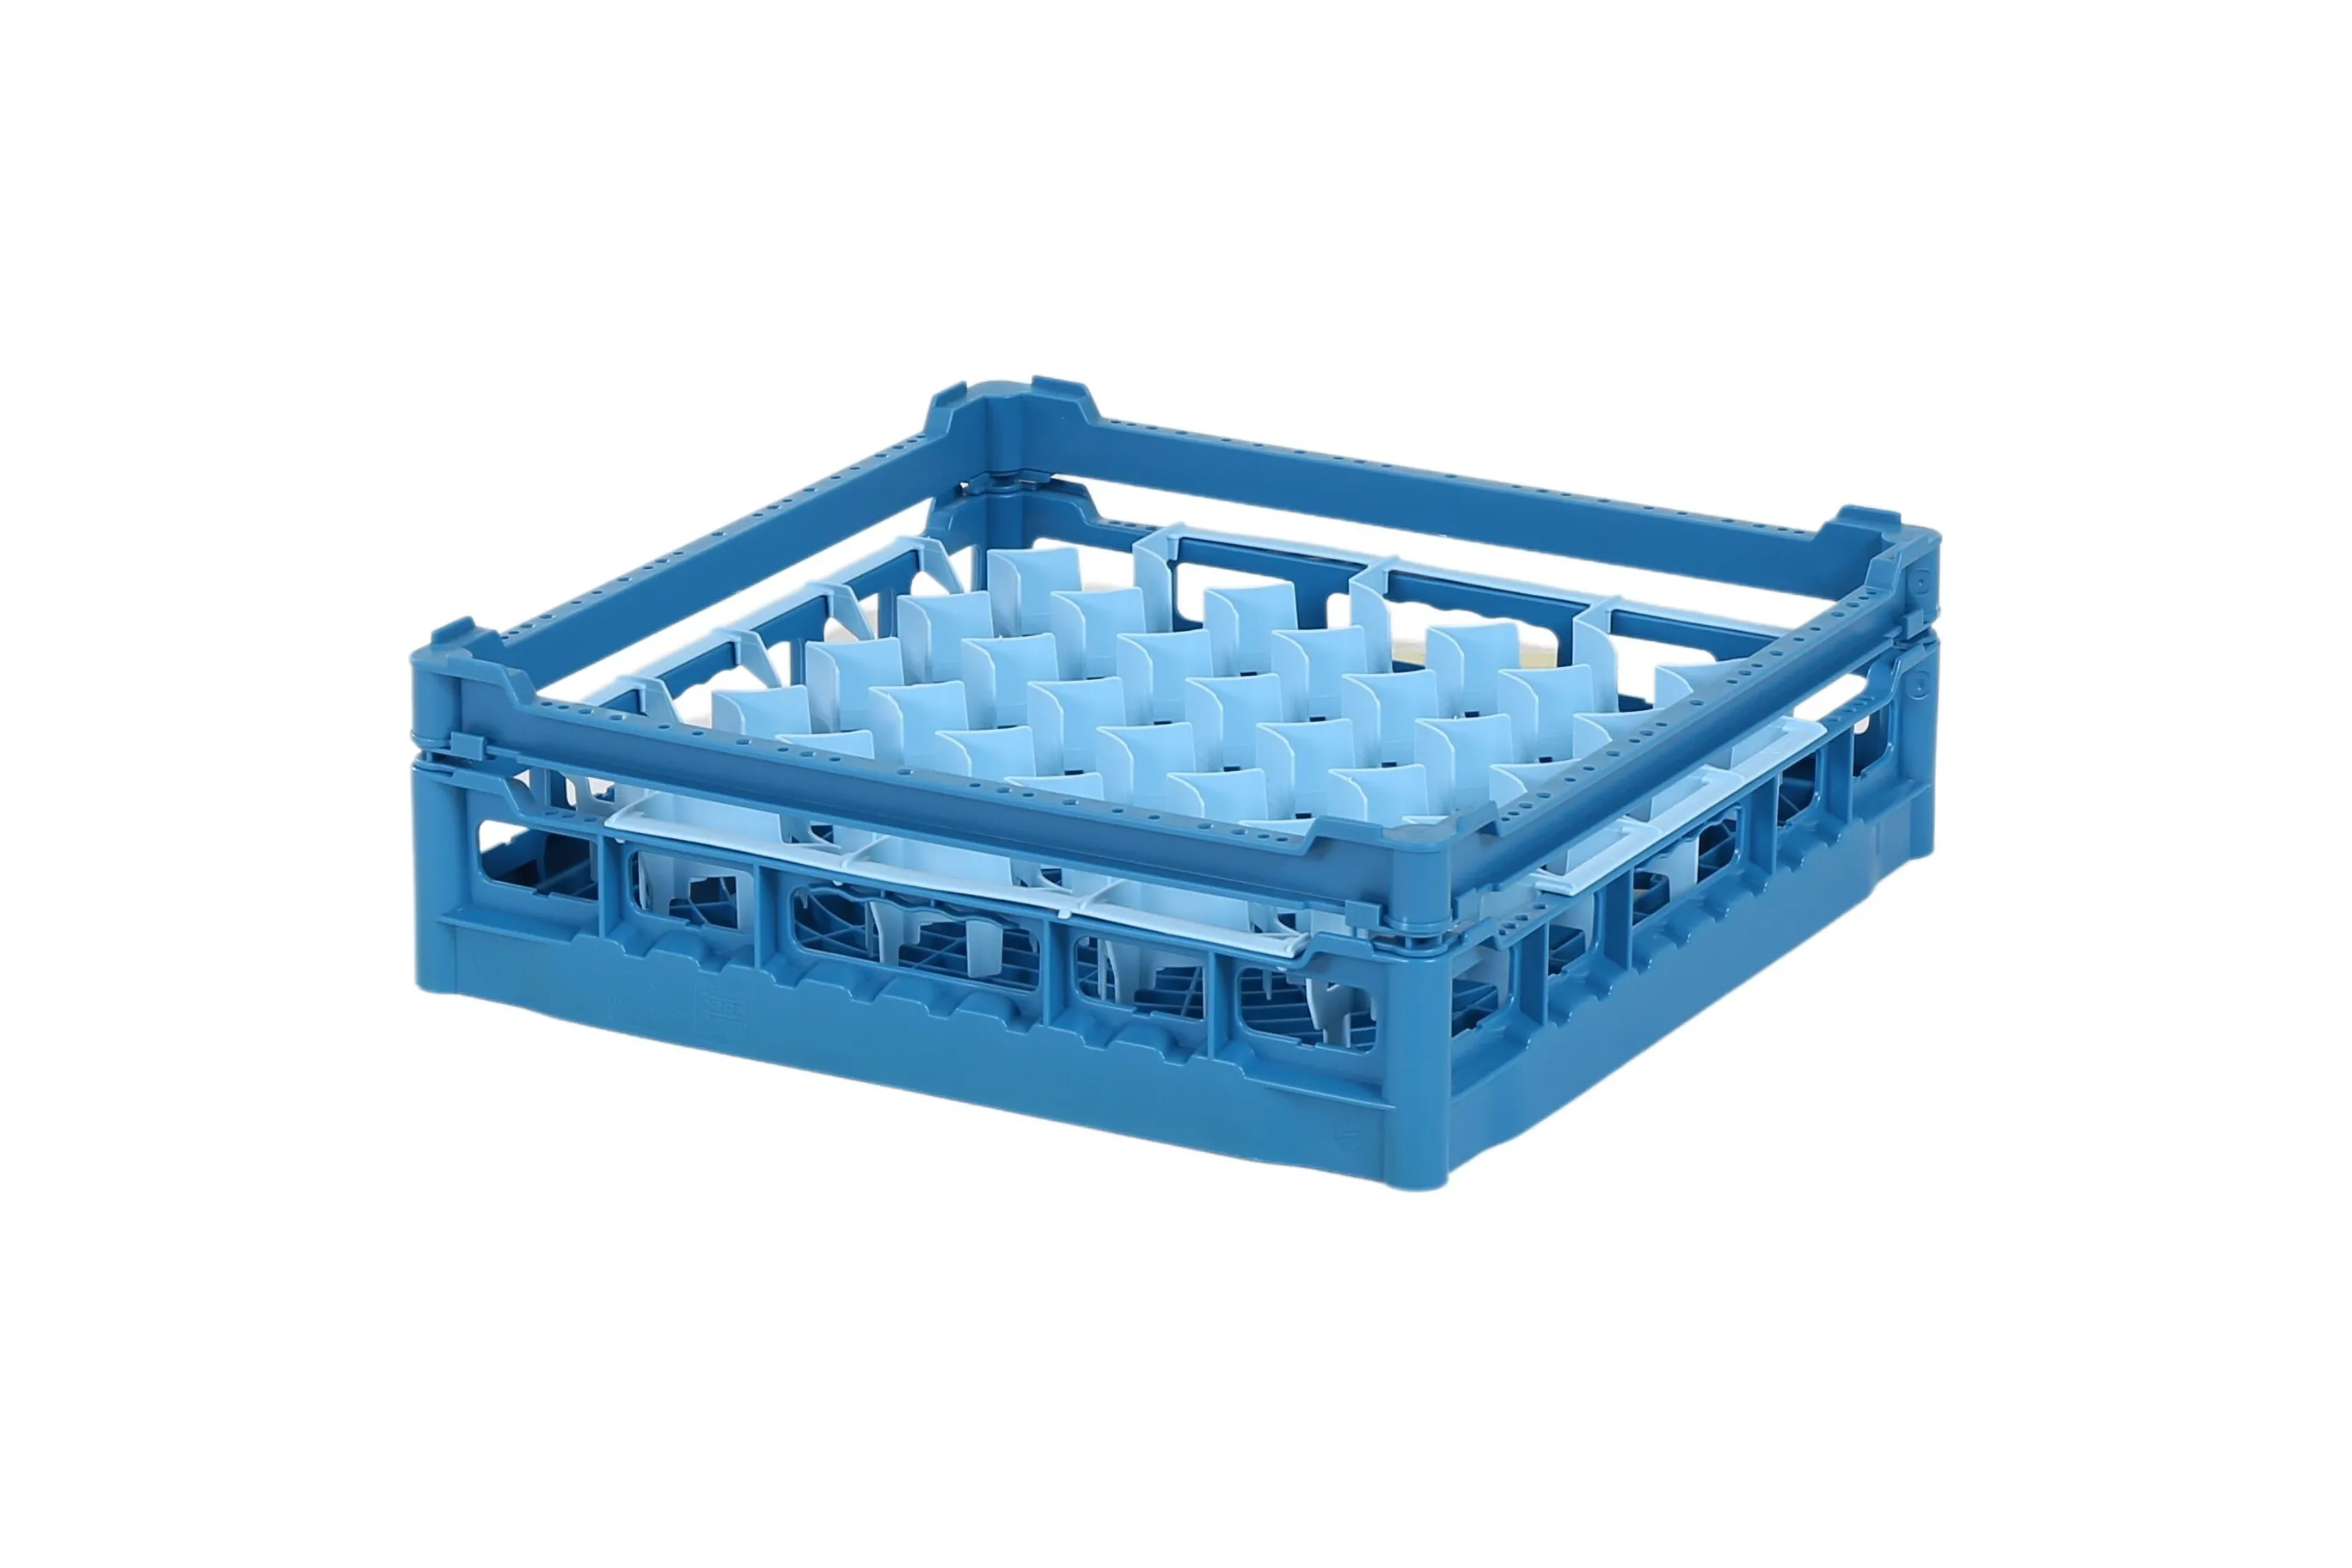 Glass basket 500x500mm blue - maximum glass height 110 mm - with blue 44-compartment partition - maximum glass diameter 67mm